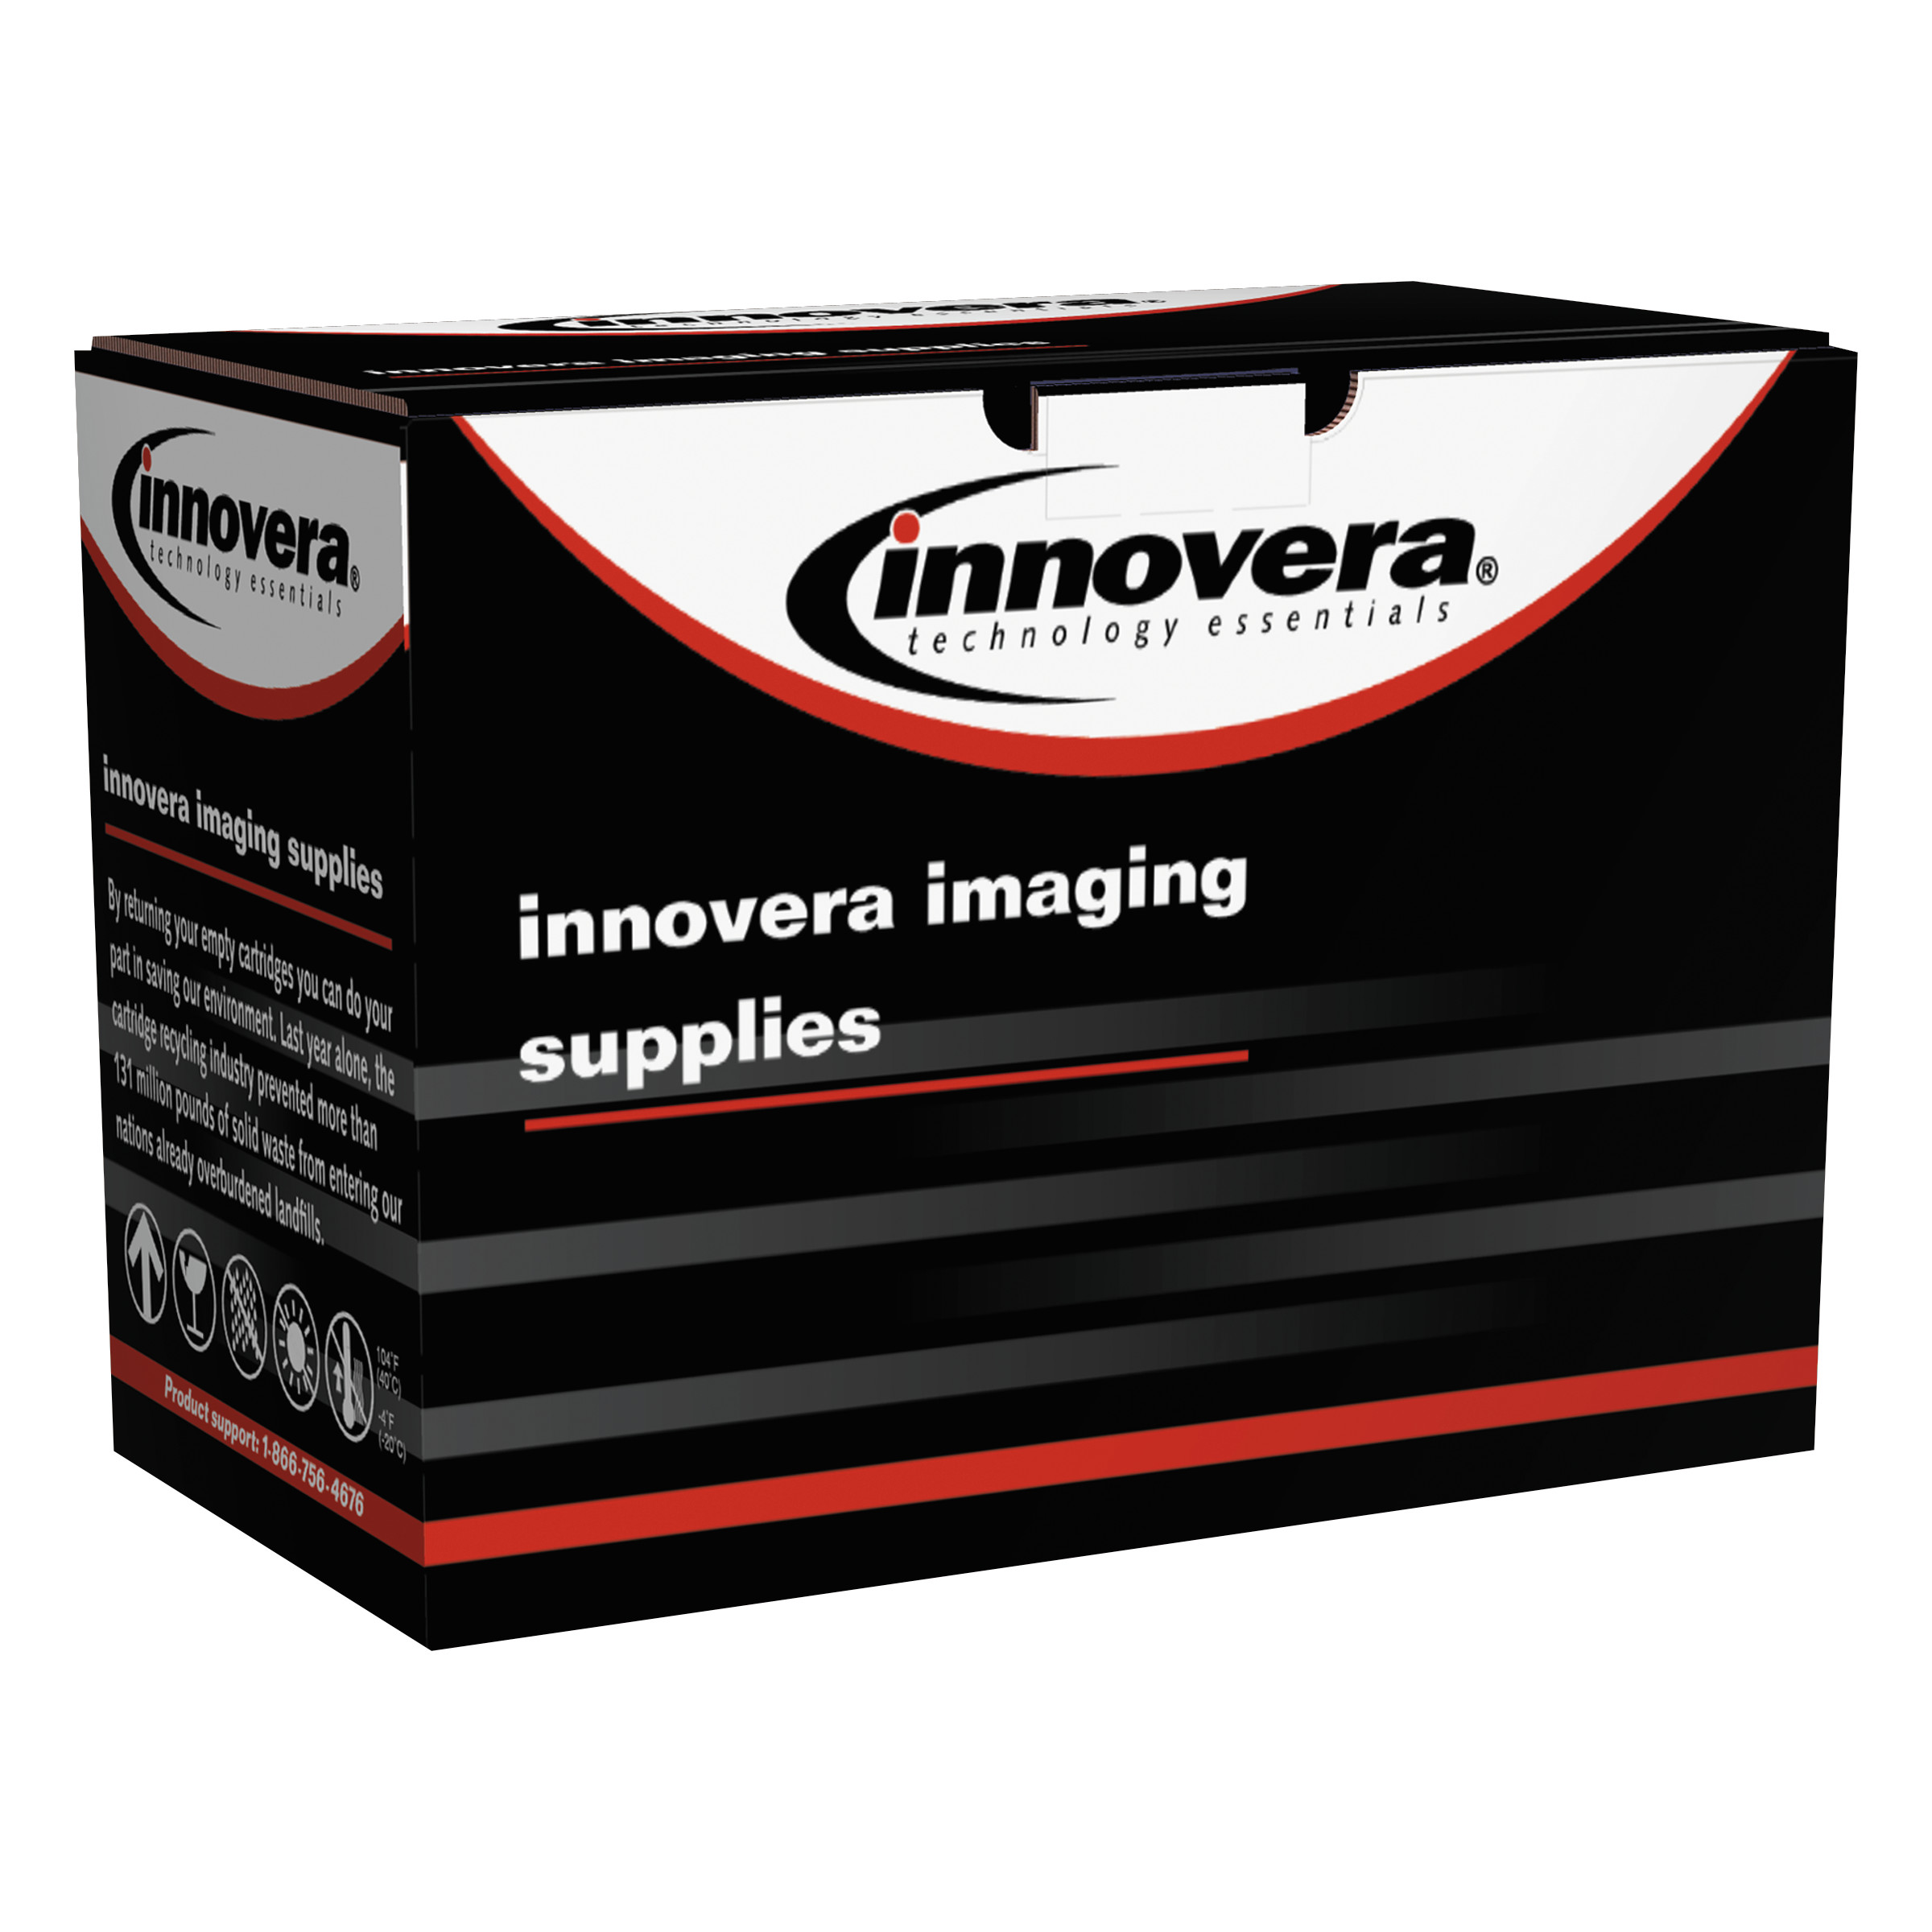 Innovera Remanufactured Black Extra High-yield Toner, Replacement For Mlt-d203e (su890a), 10,000 Page-yield - image 2 of 2